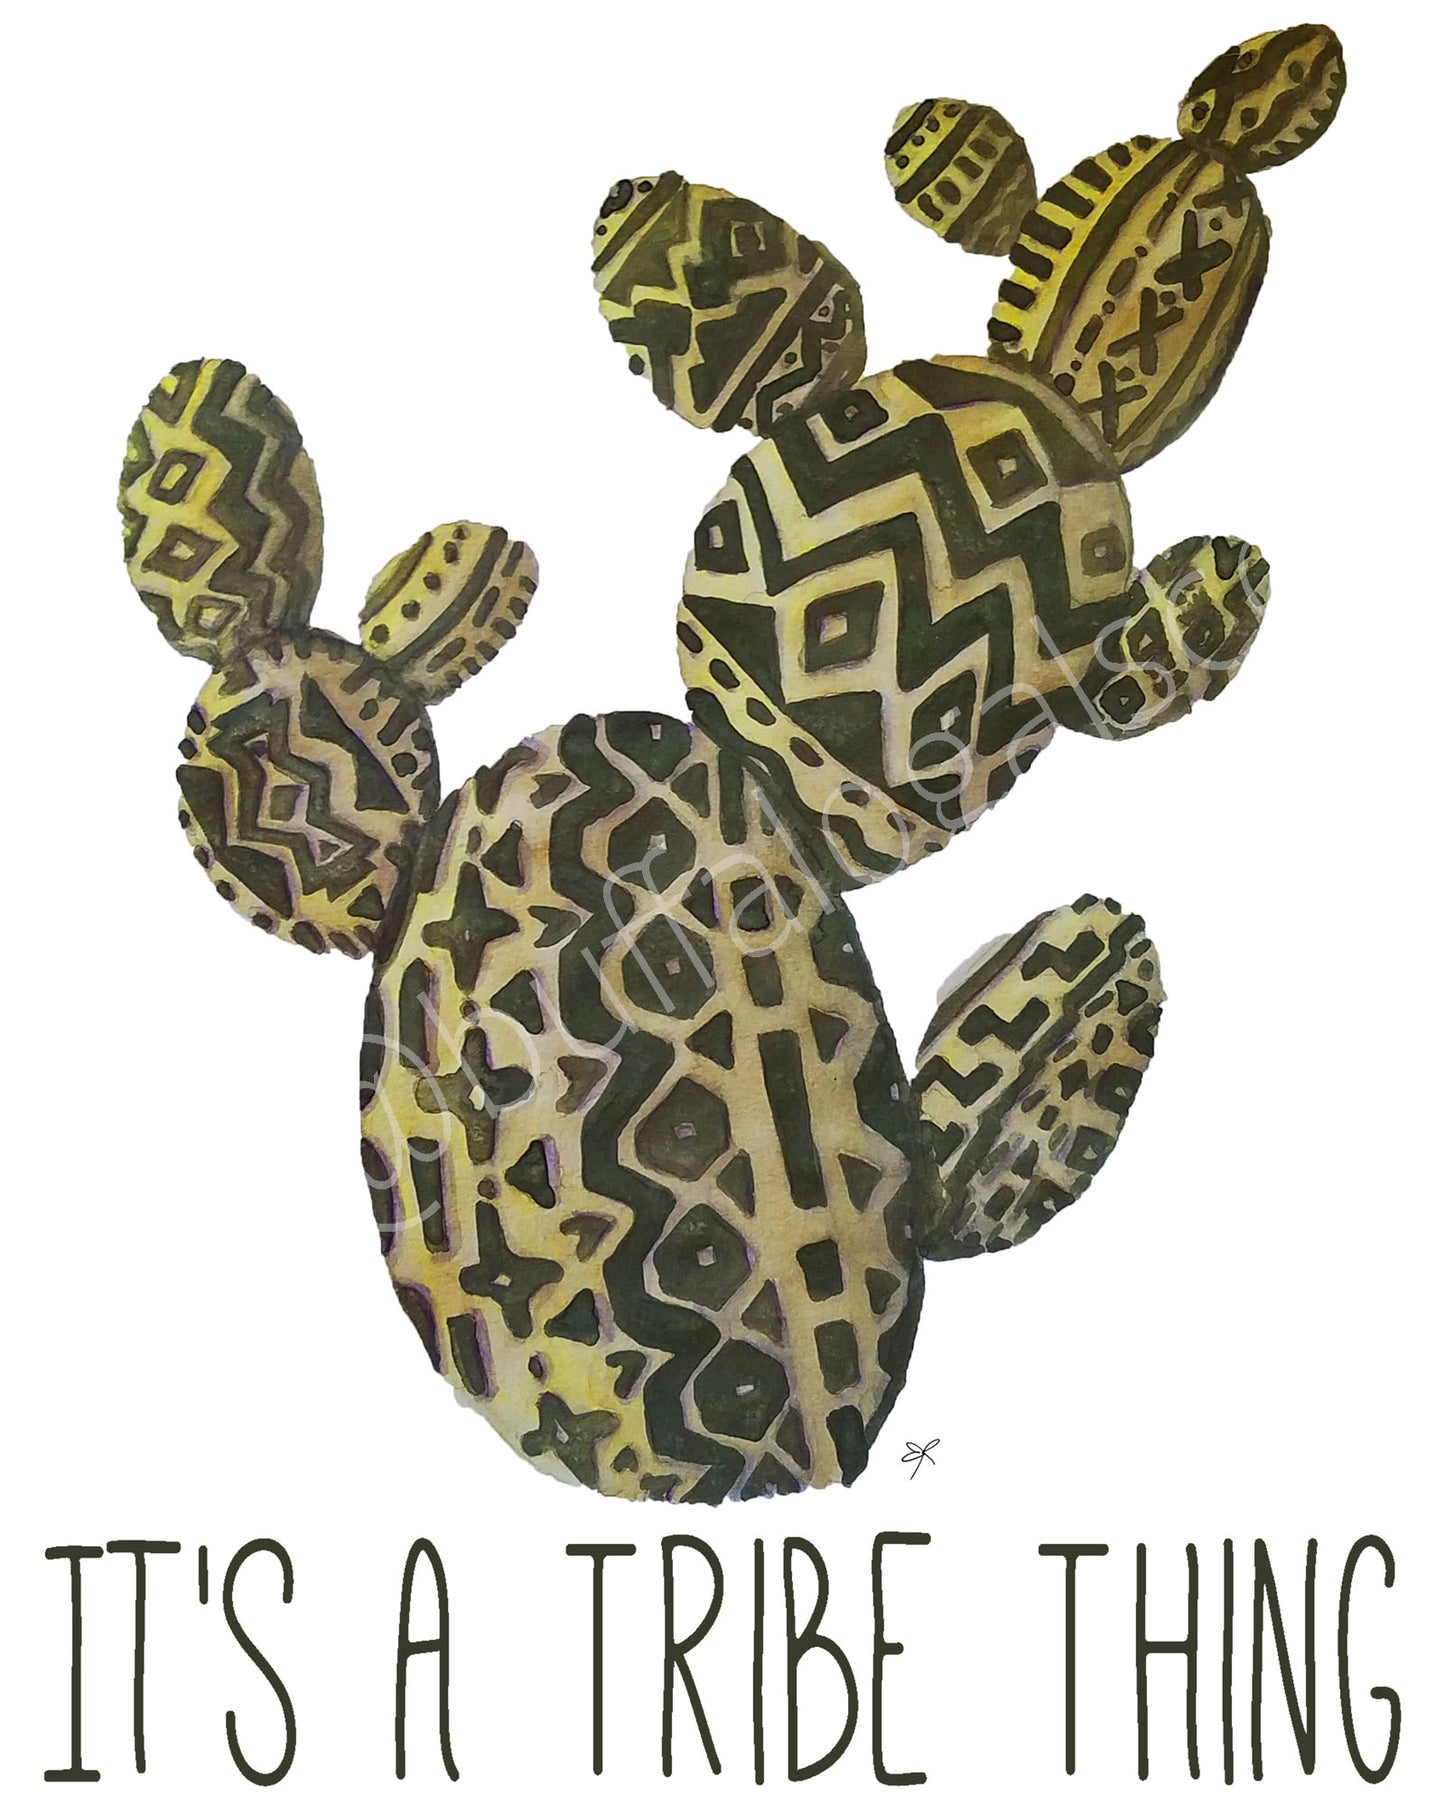 It's A Tribe Thing Print